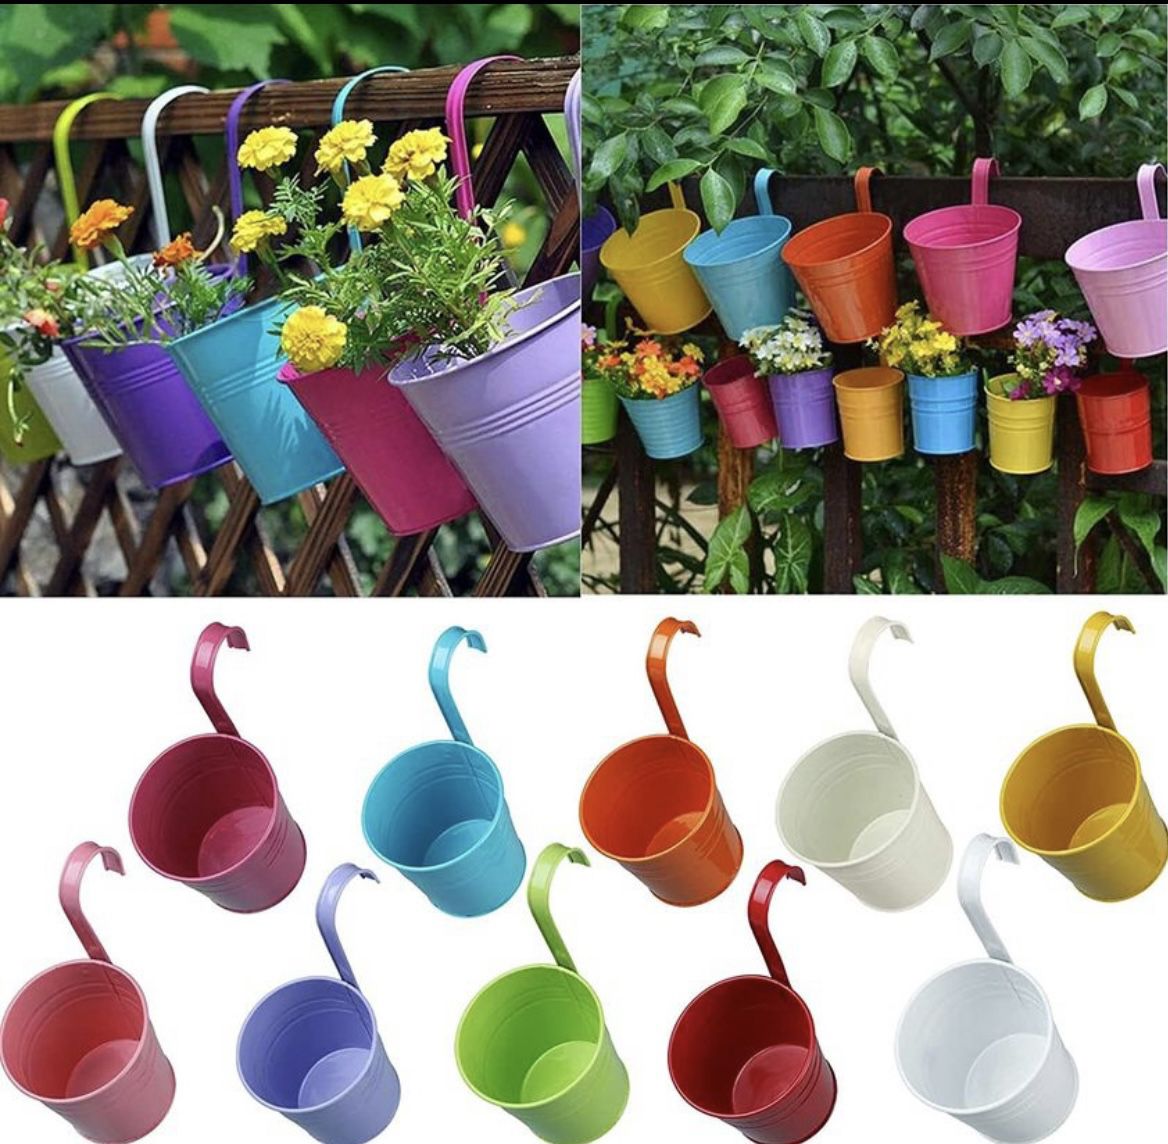 10pcs ,Metal Hanging Flower Pots with Drainage Hole